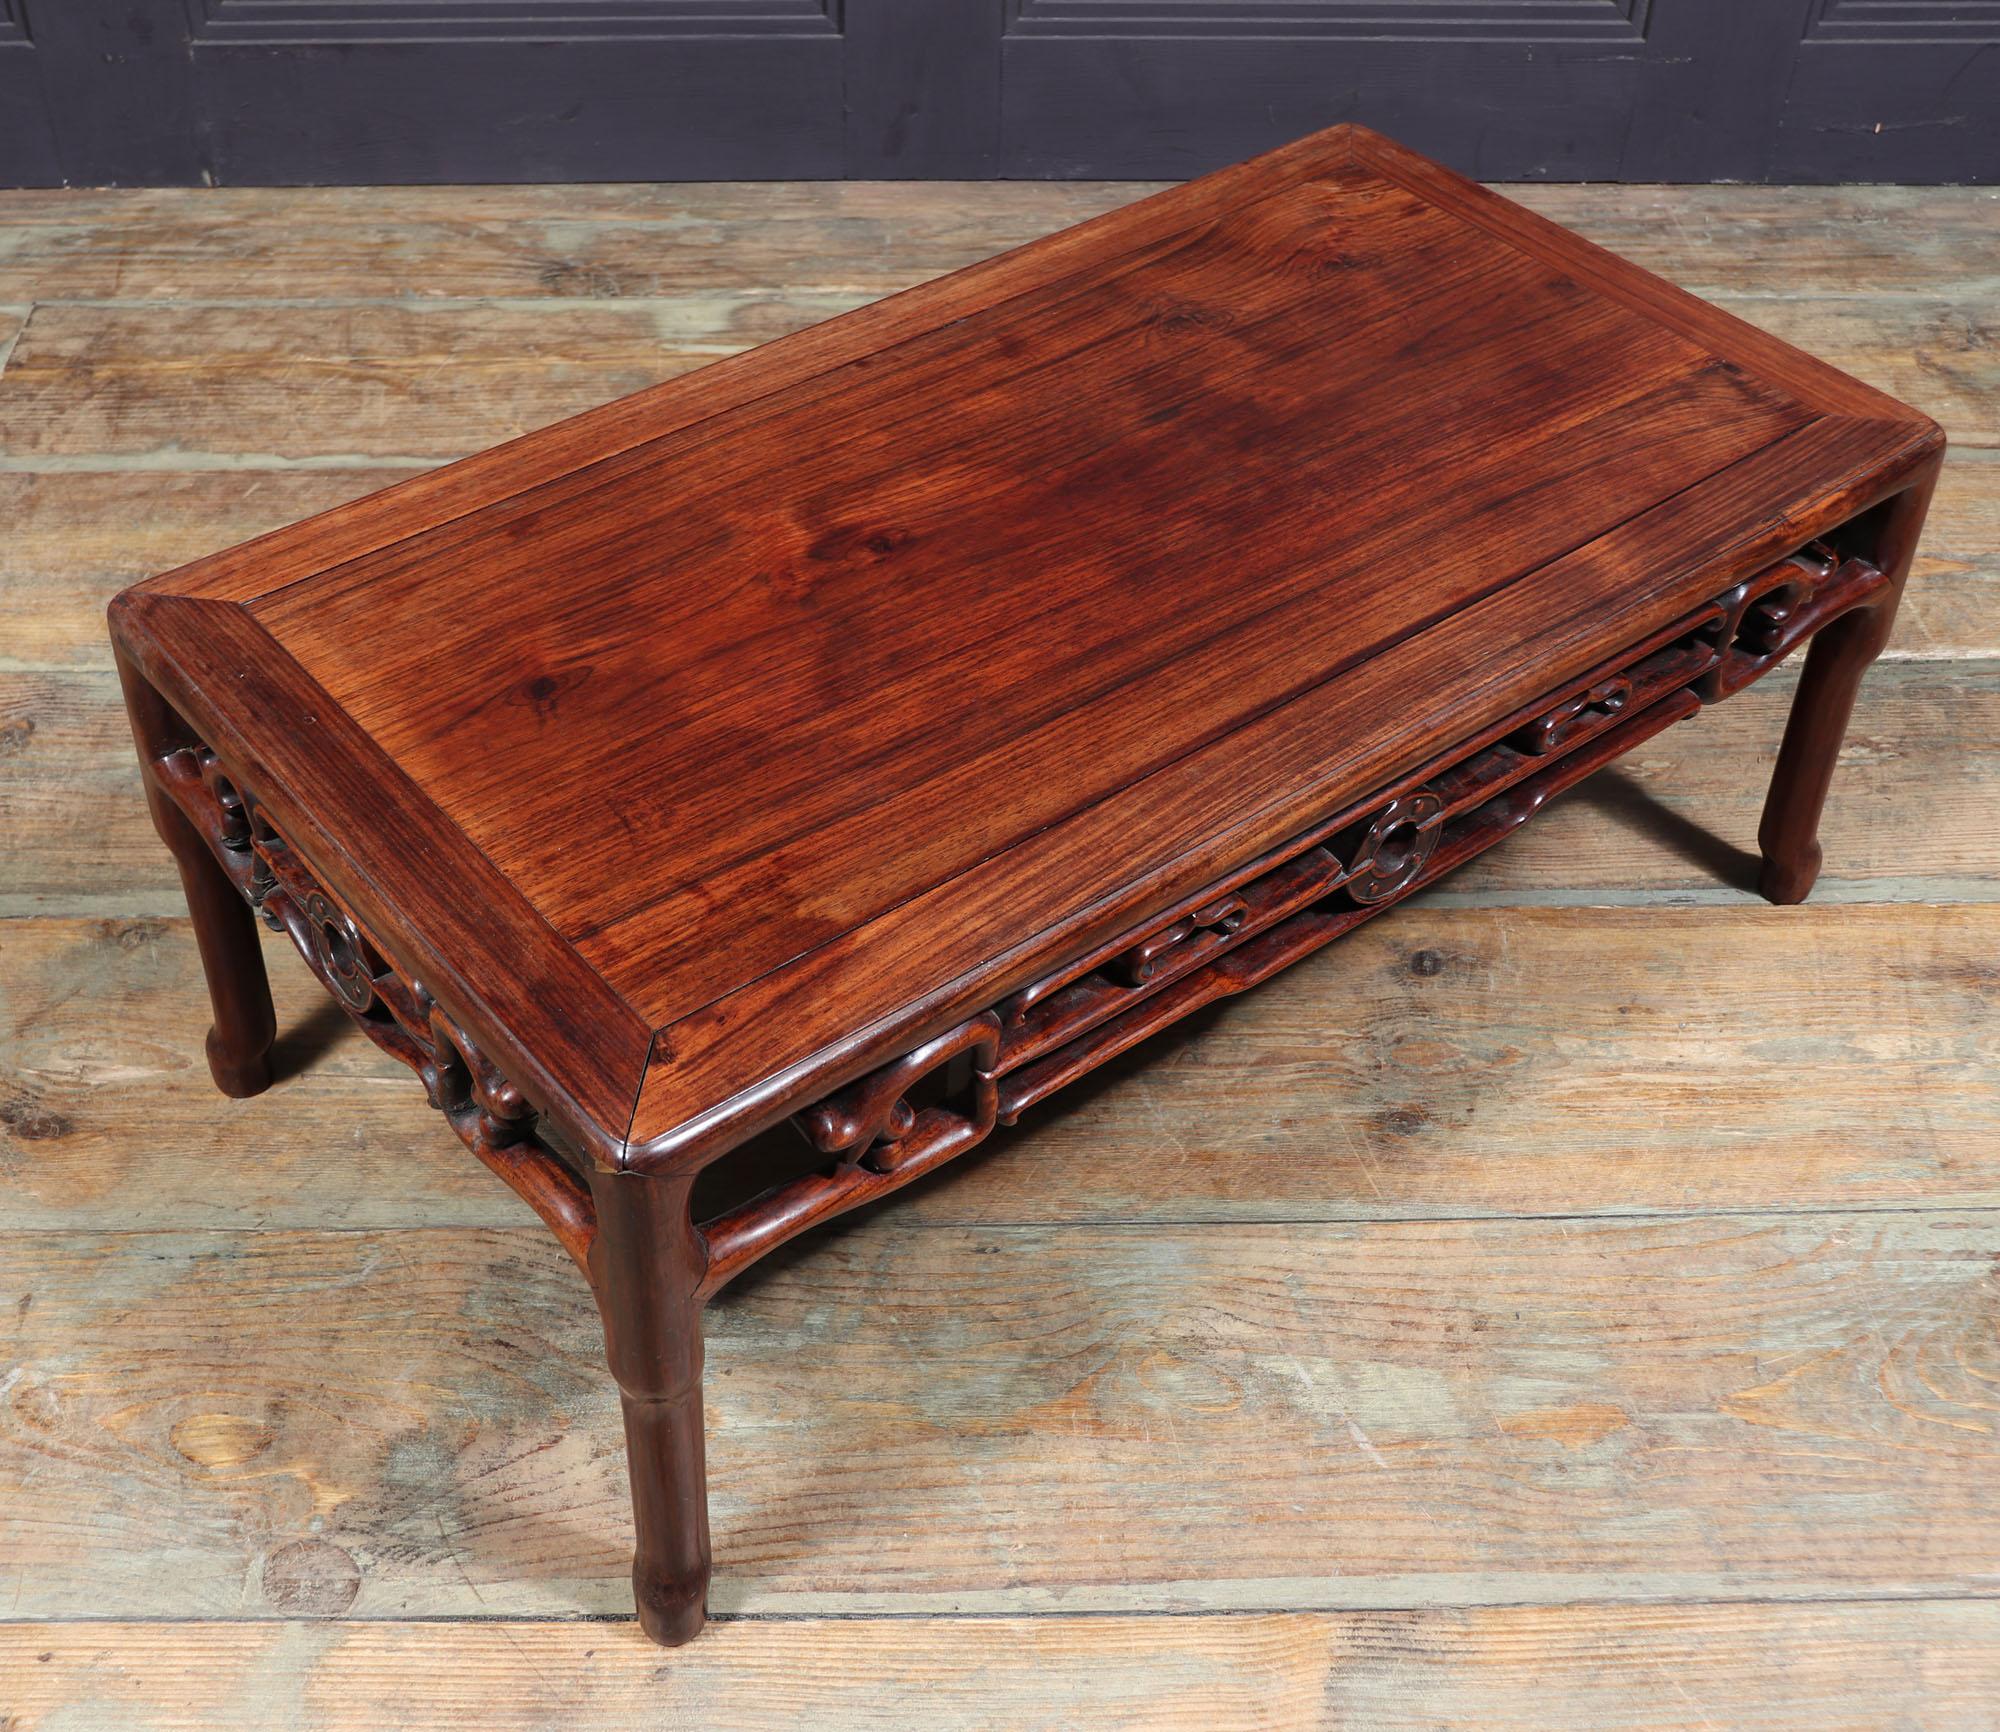 Small Huali Kang Coffee Table, c1880 In Good Condition For Sale In Paddock Wood Tonbridge, GB